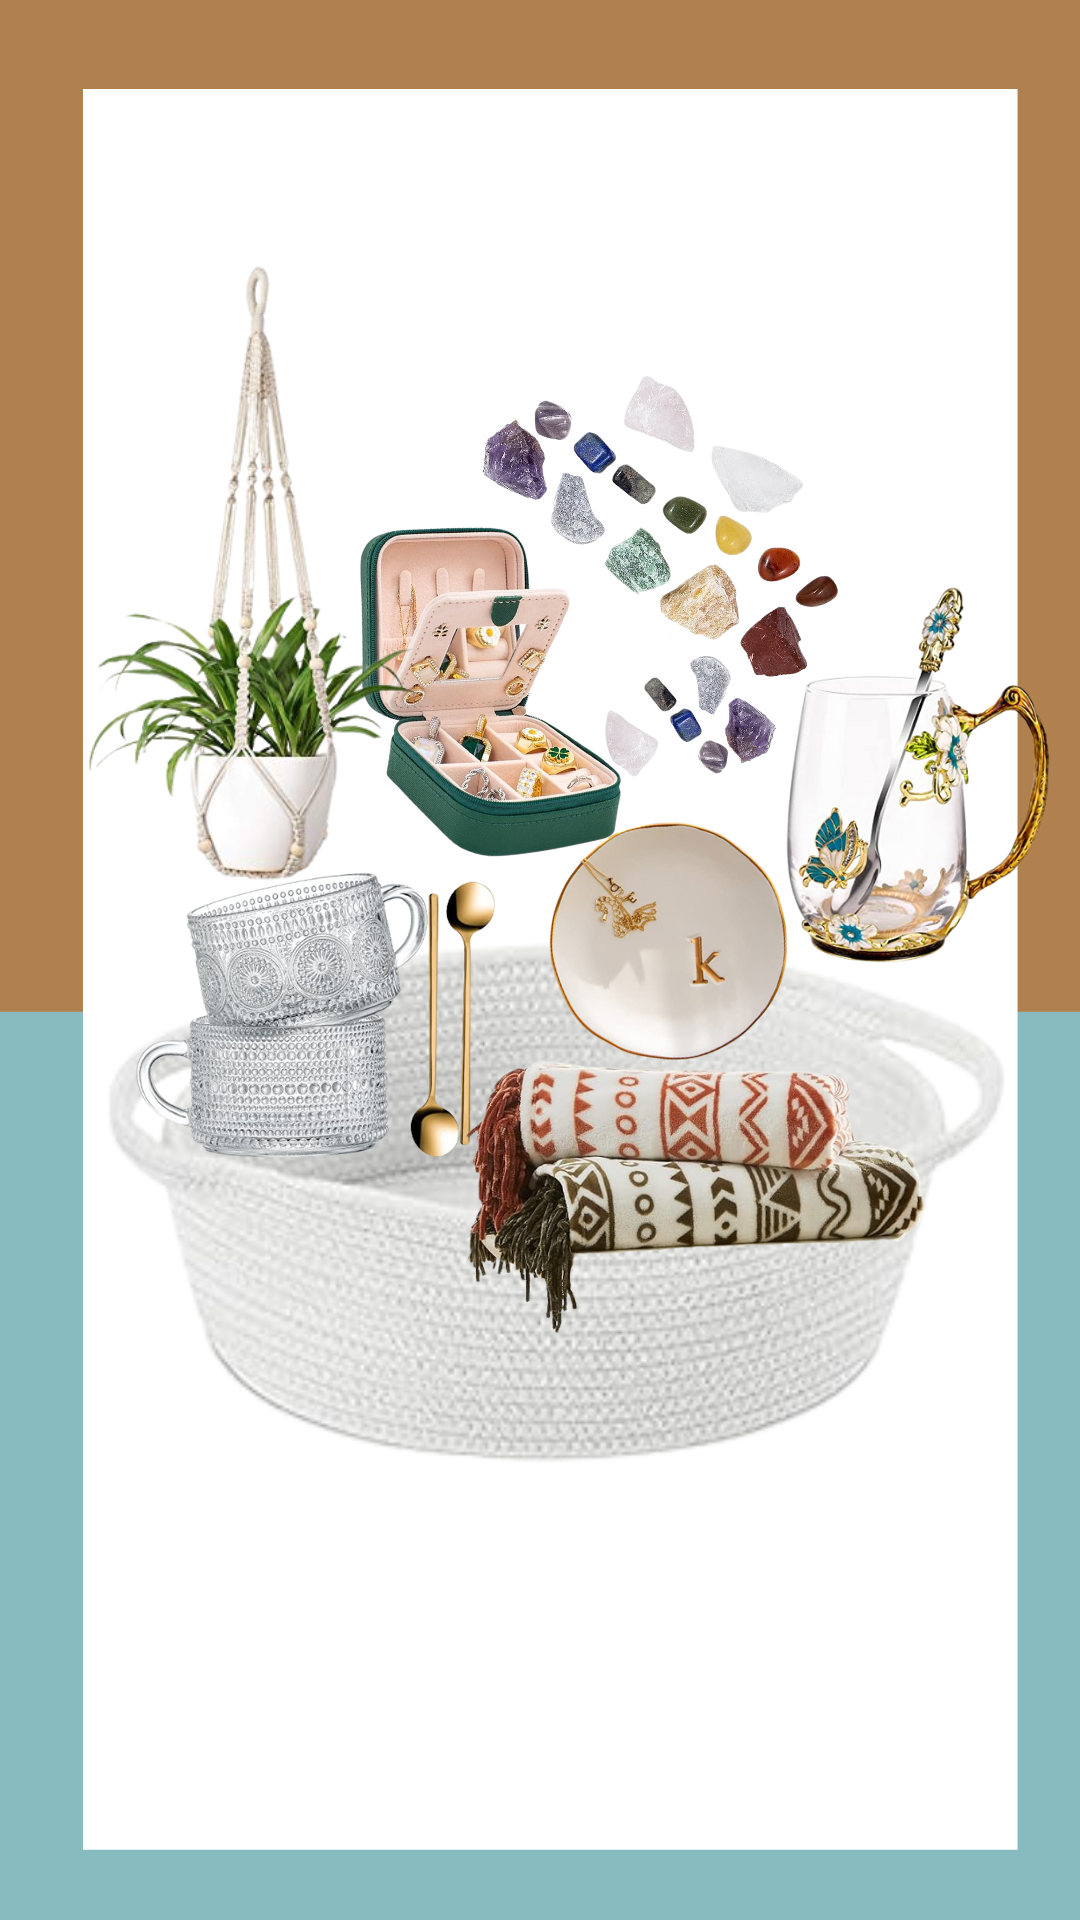 How to Craft the Perfect Bohemian Burr Basket. A Step-by-Step Guide to Building the Ultimate Boho Gift Basket